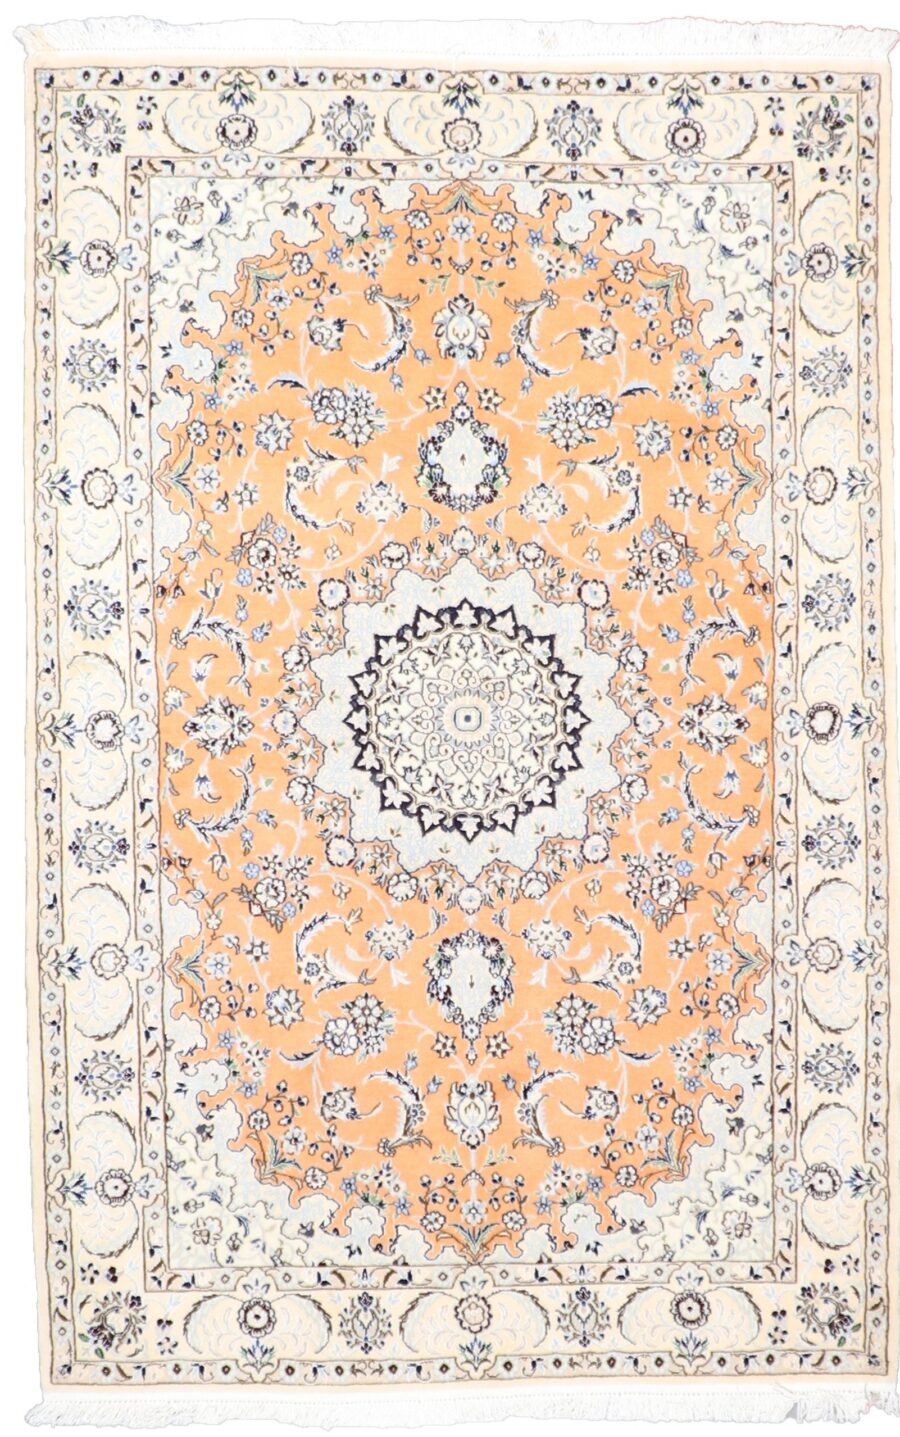 4’4”x6’7” Traditional Wool & Silk Hand-Knotted Rug - Direct Rug Import | Rugs in Chicago, Indiana,South Bend,Granger